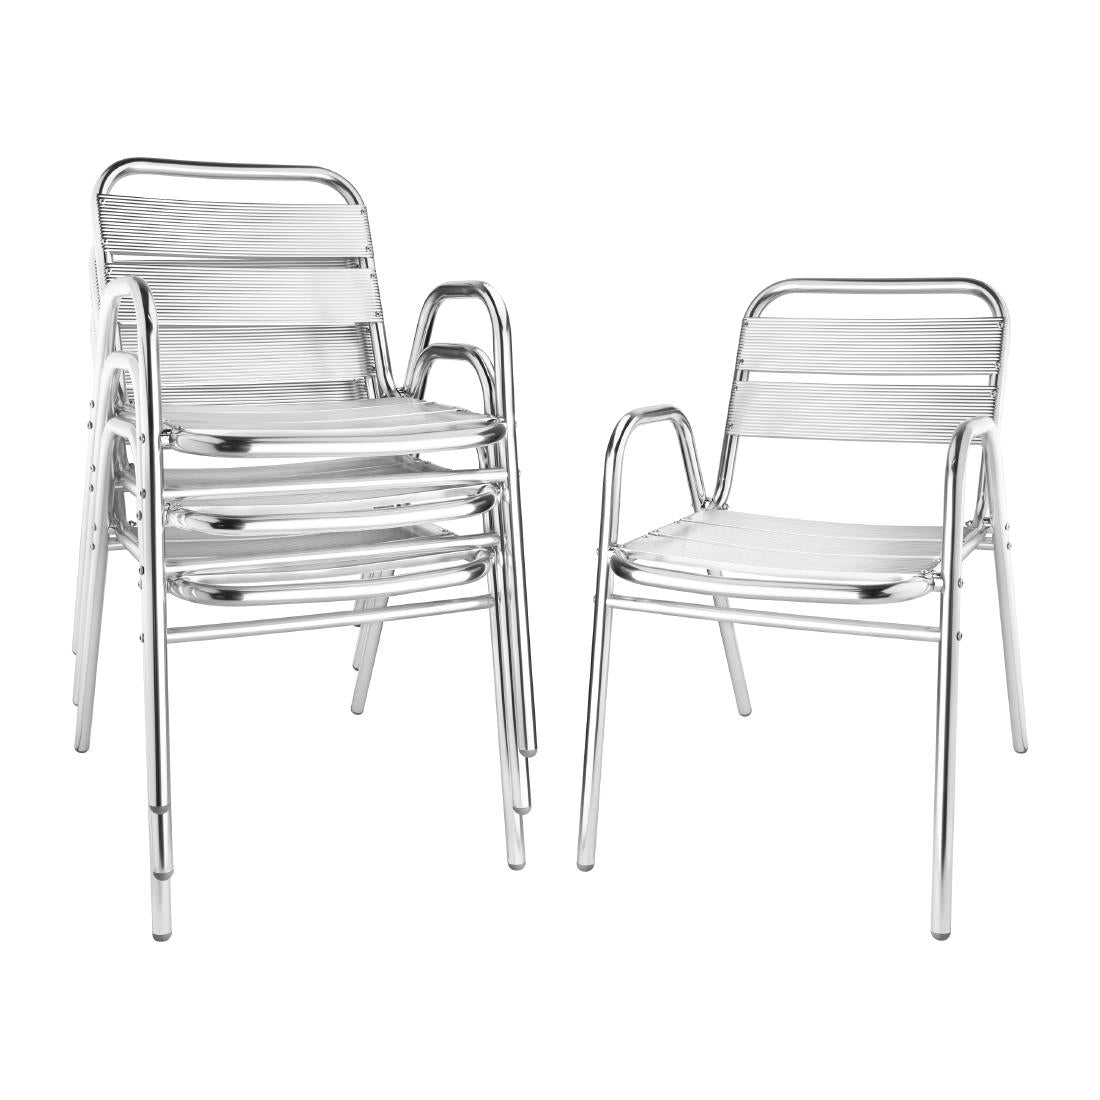 Bolero Aluminium Stacking Chairs Arched Arms (Pack of 4) JD Catering Equipment Solutions Ltd